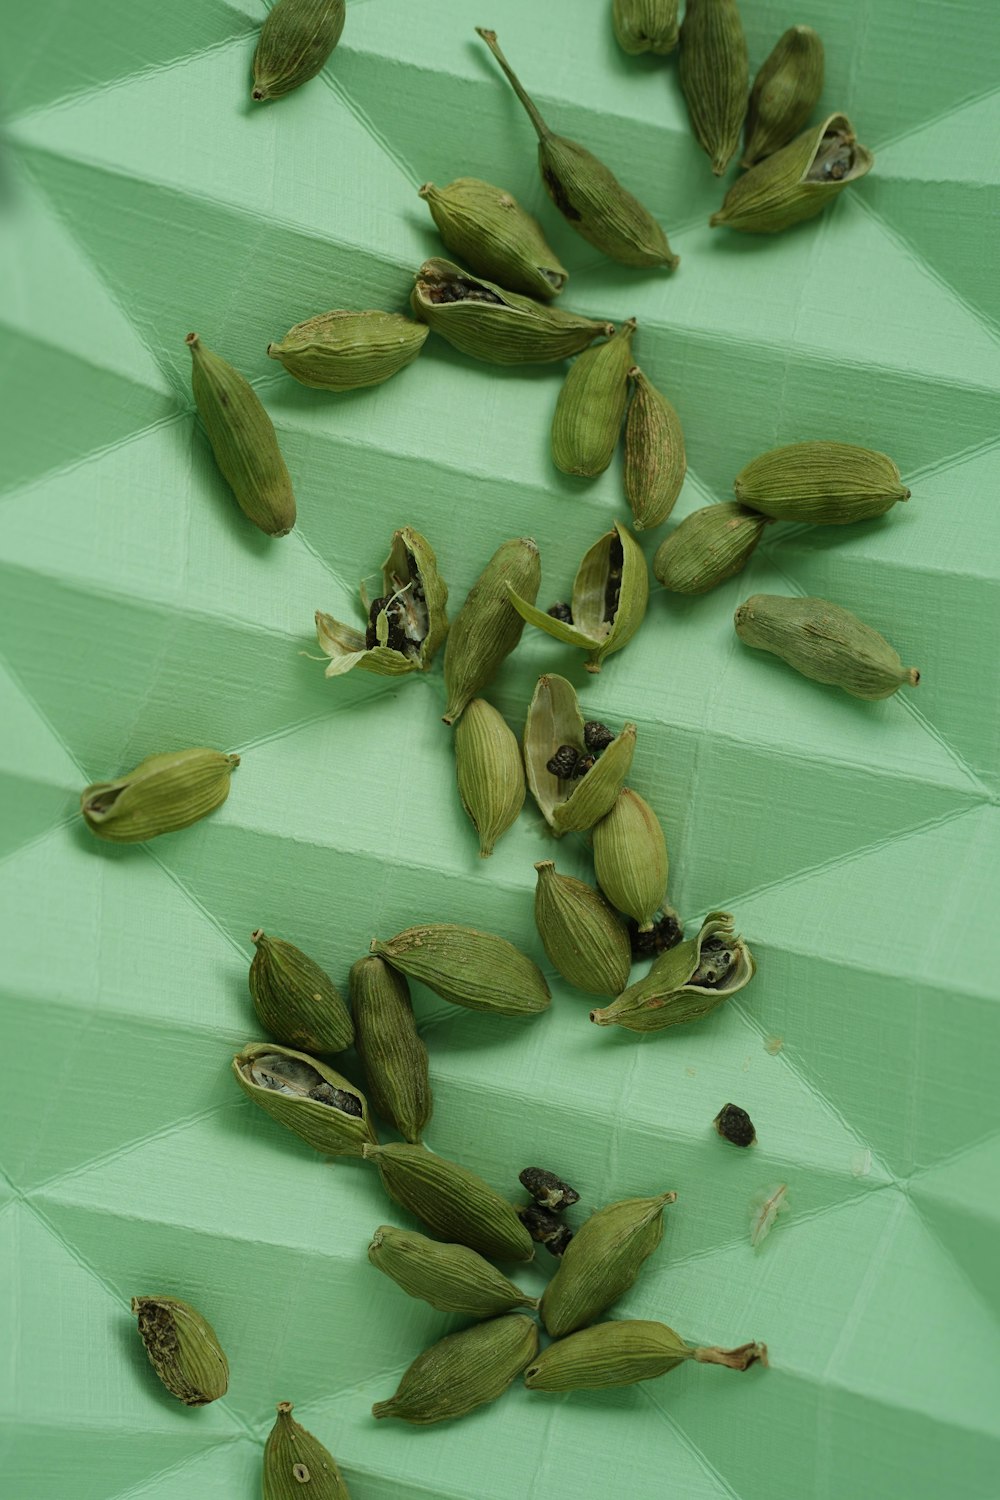 a bunch of nuts on a green surface